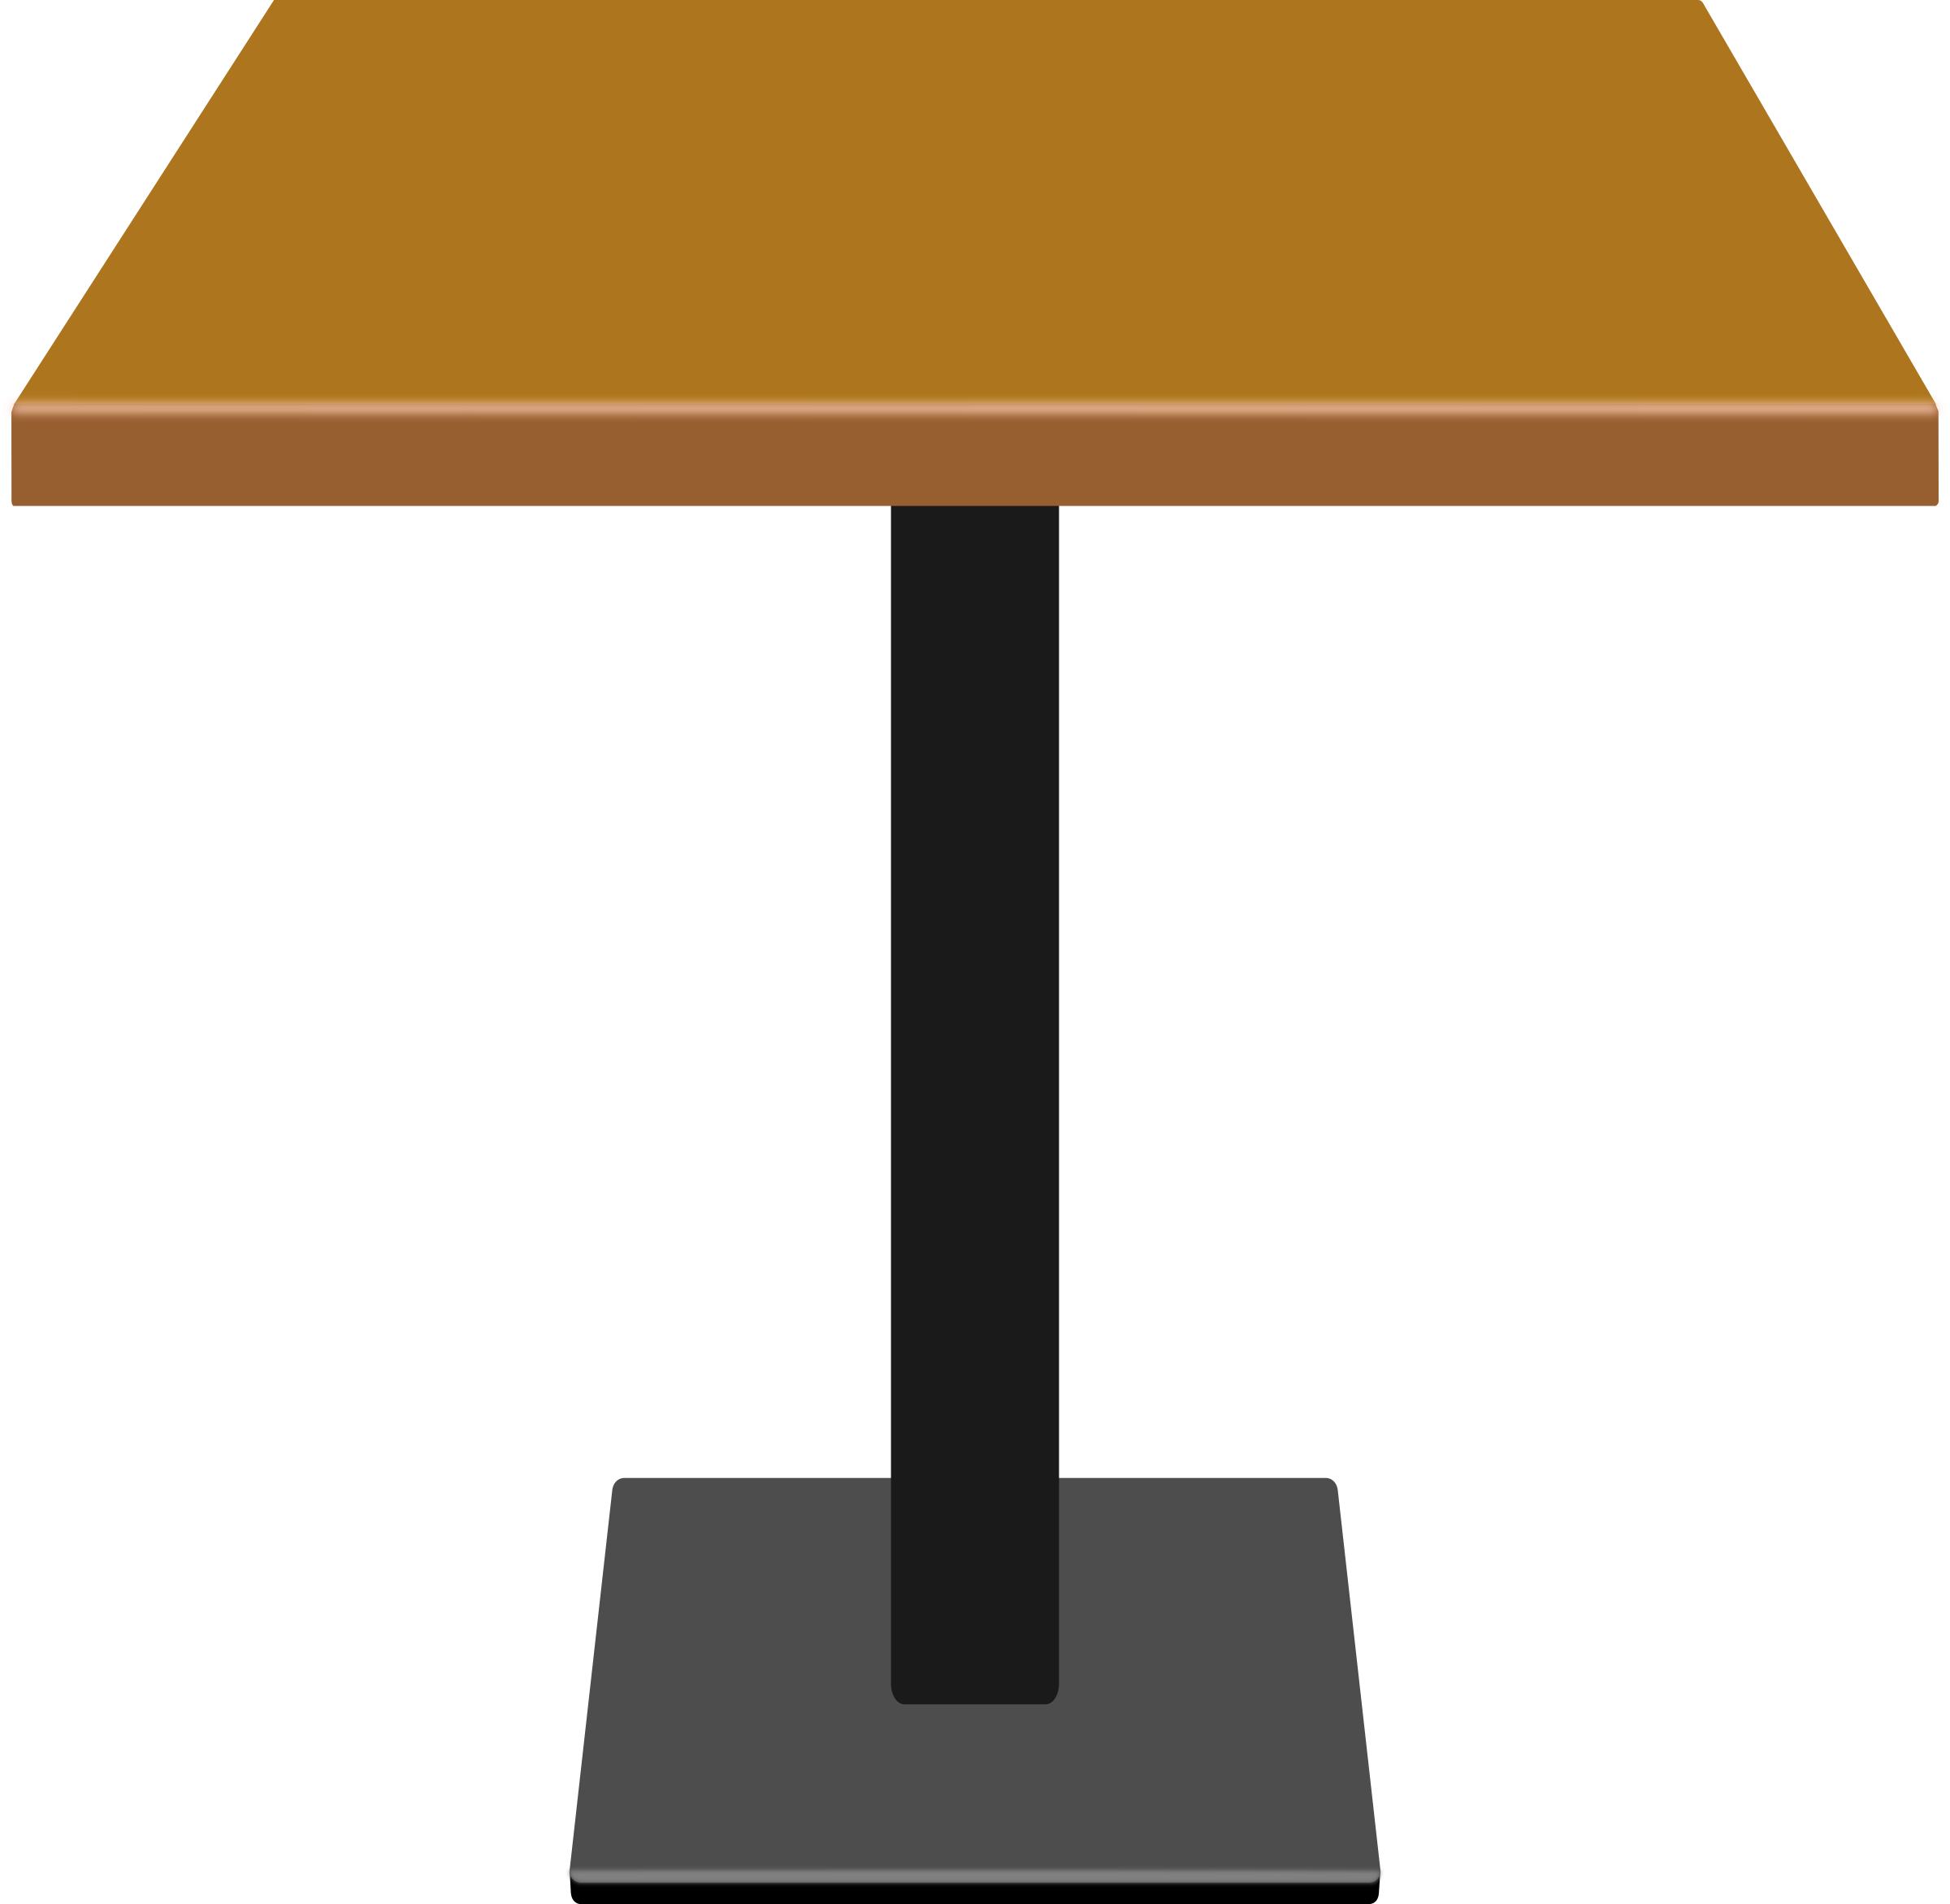 Set up the table Swipe gradually Wood Table Icons PNG - Free PNG and Icons Downloads